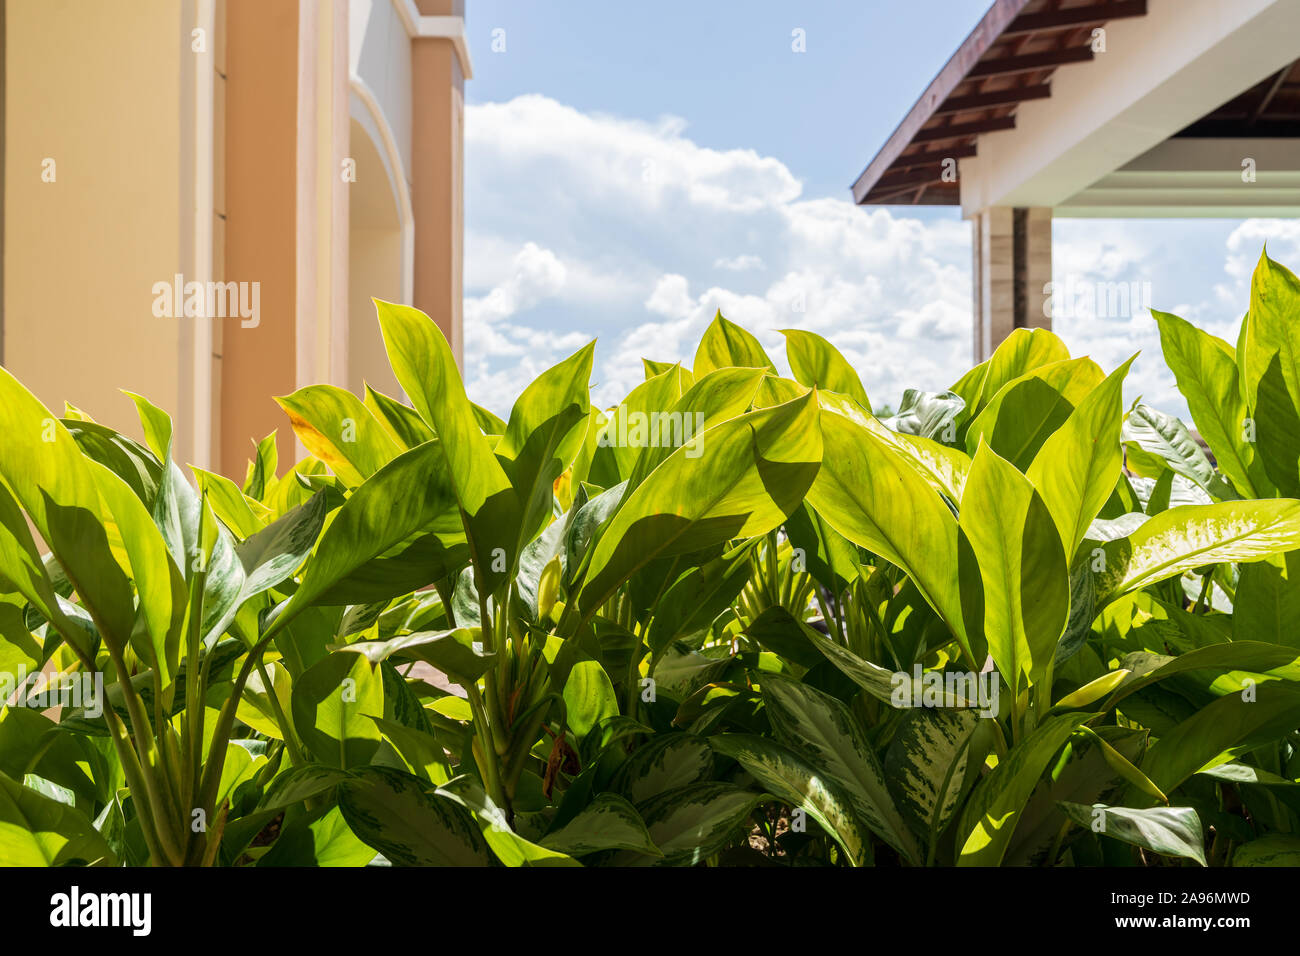 Outdoor Green Garden with Blue Skies in Punta Cana, Dominican Republic. Stock Photo